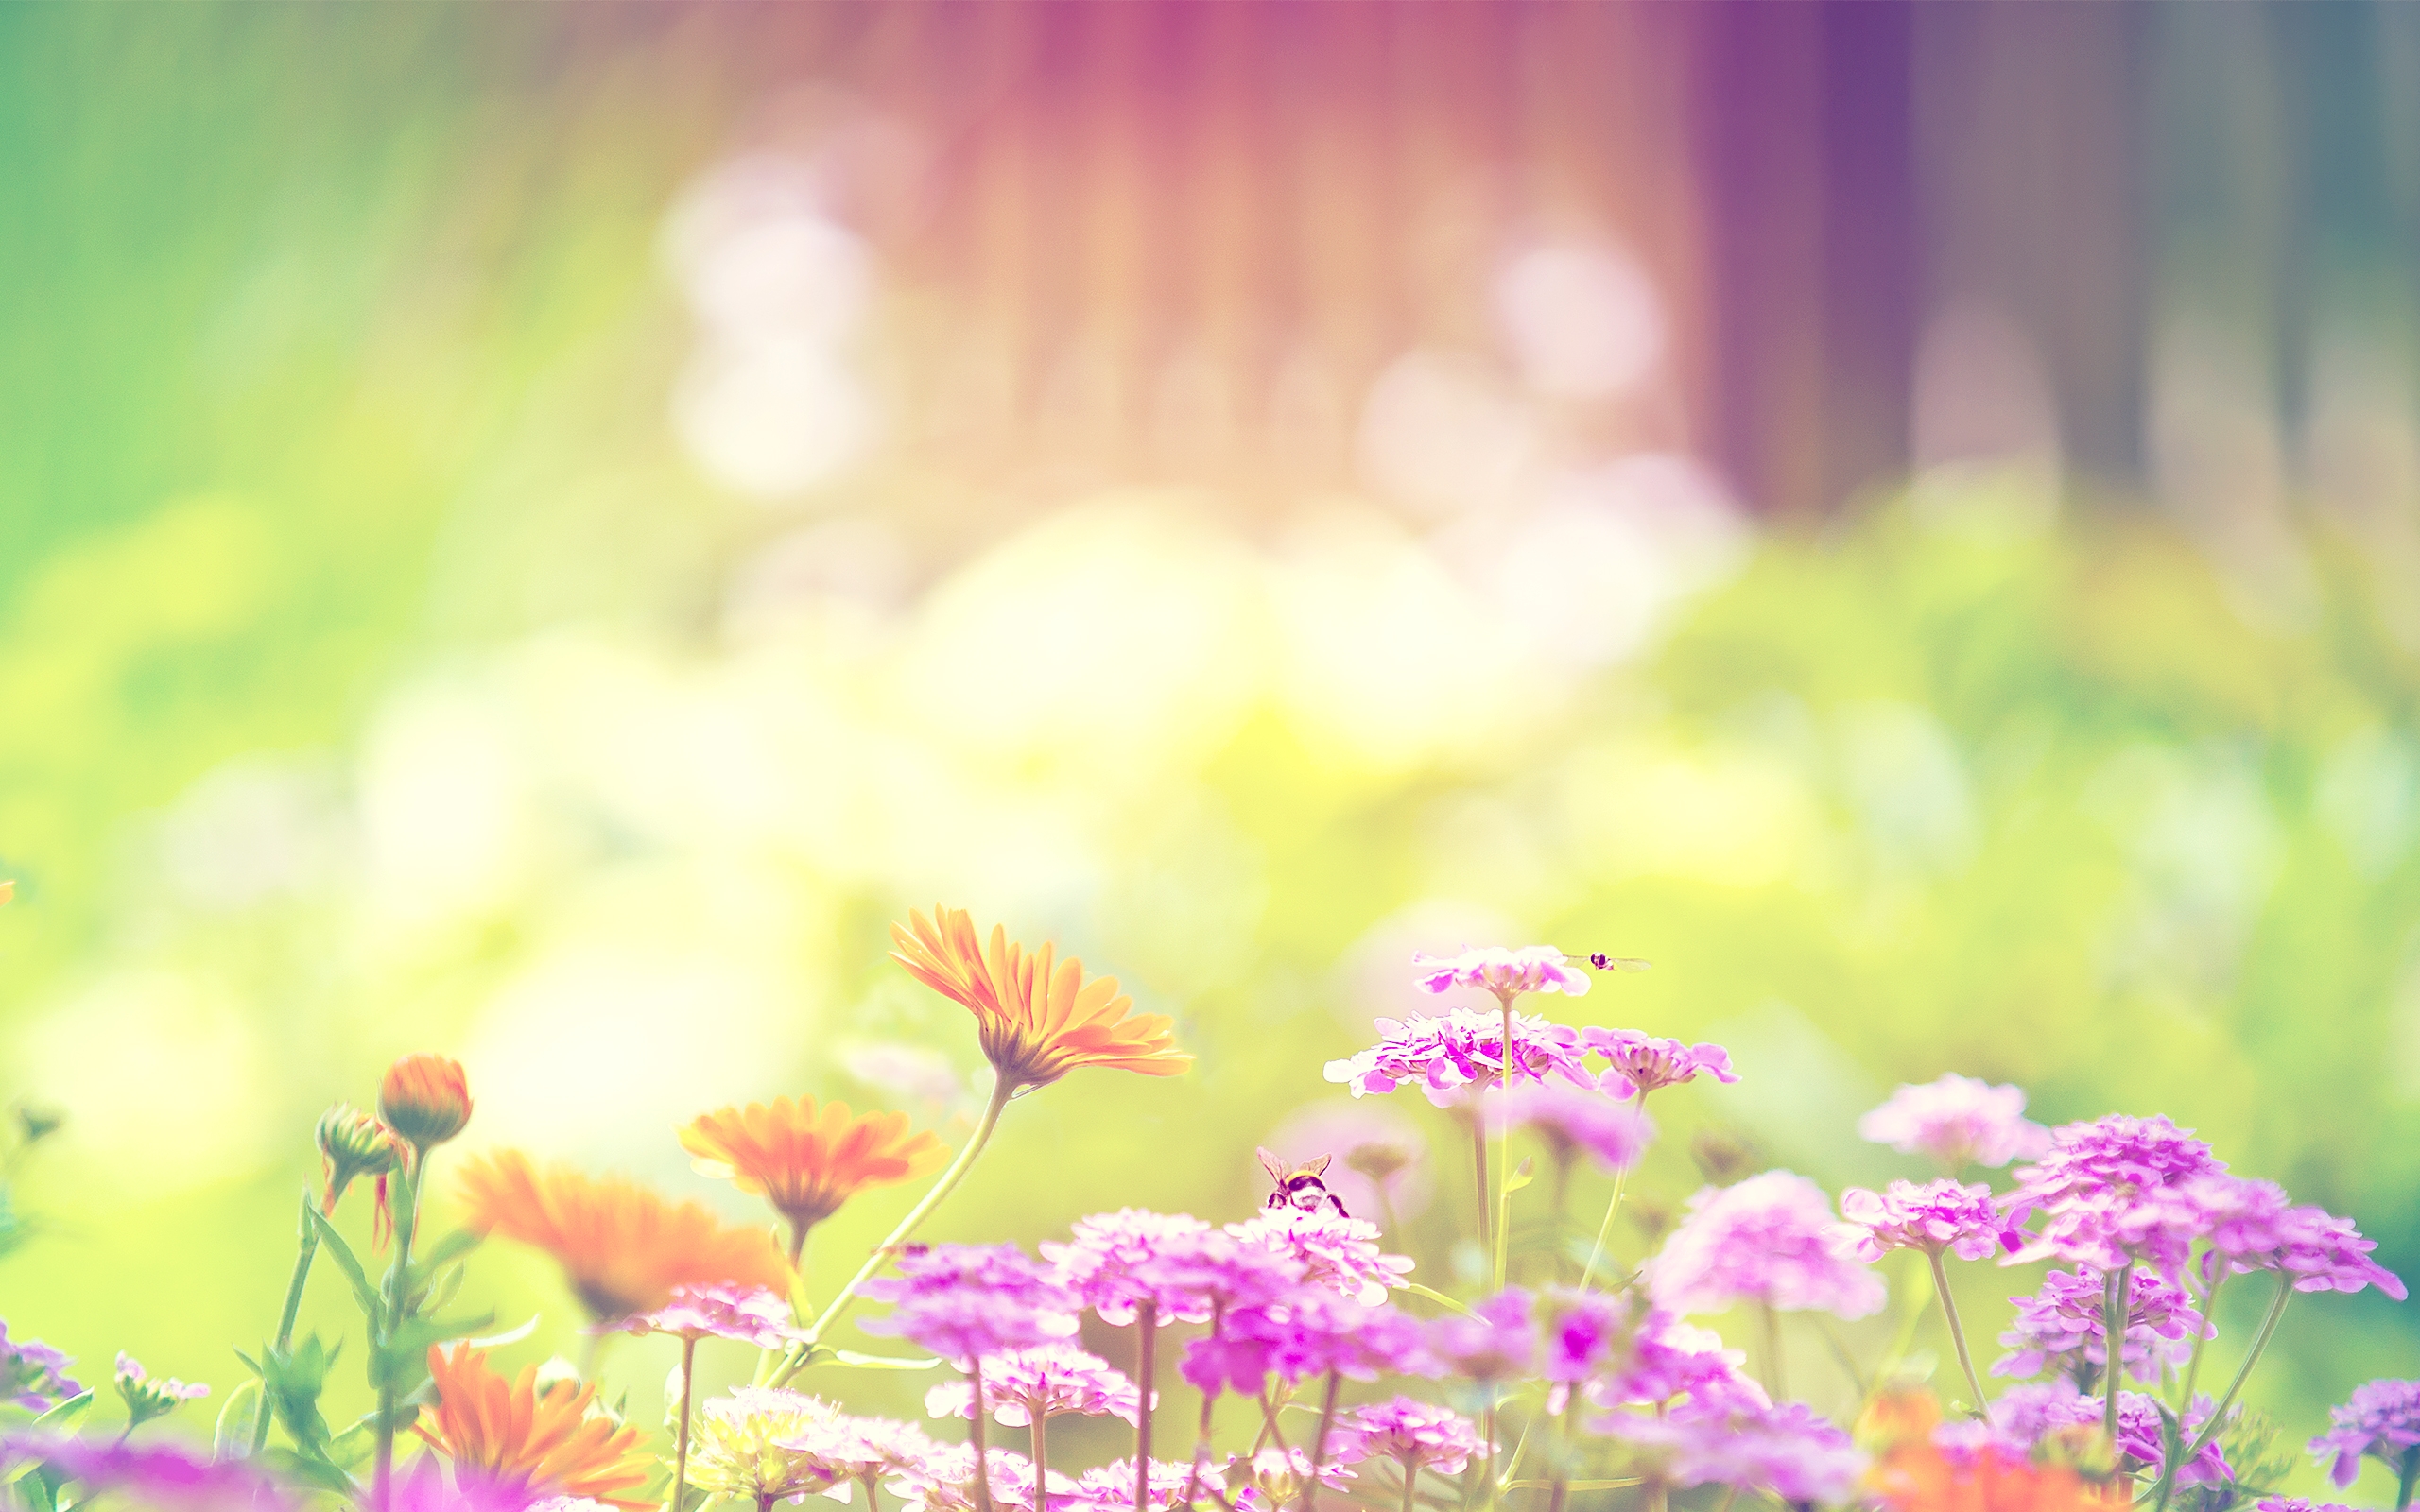 Spring Flowers Background Wallpaper 2560x1600 83366